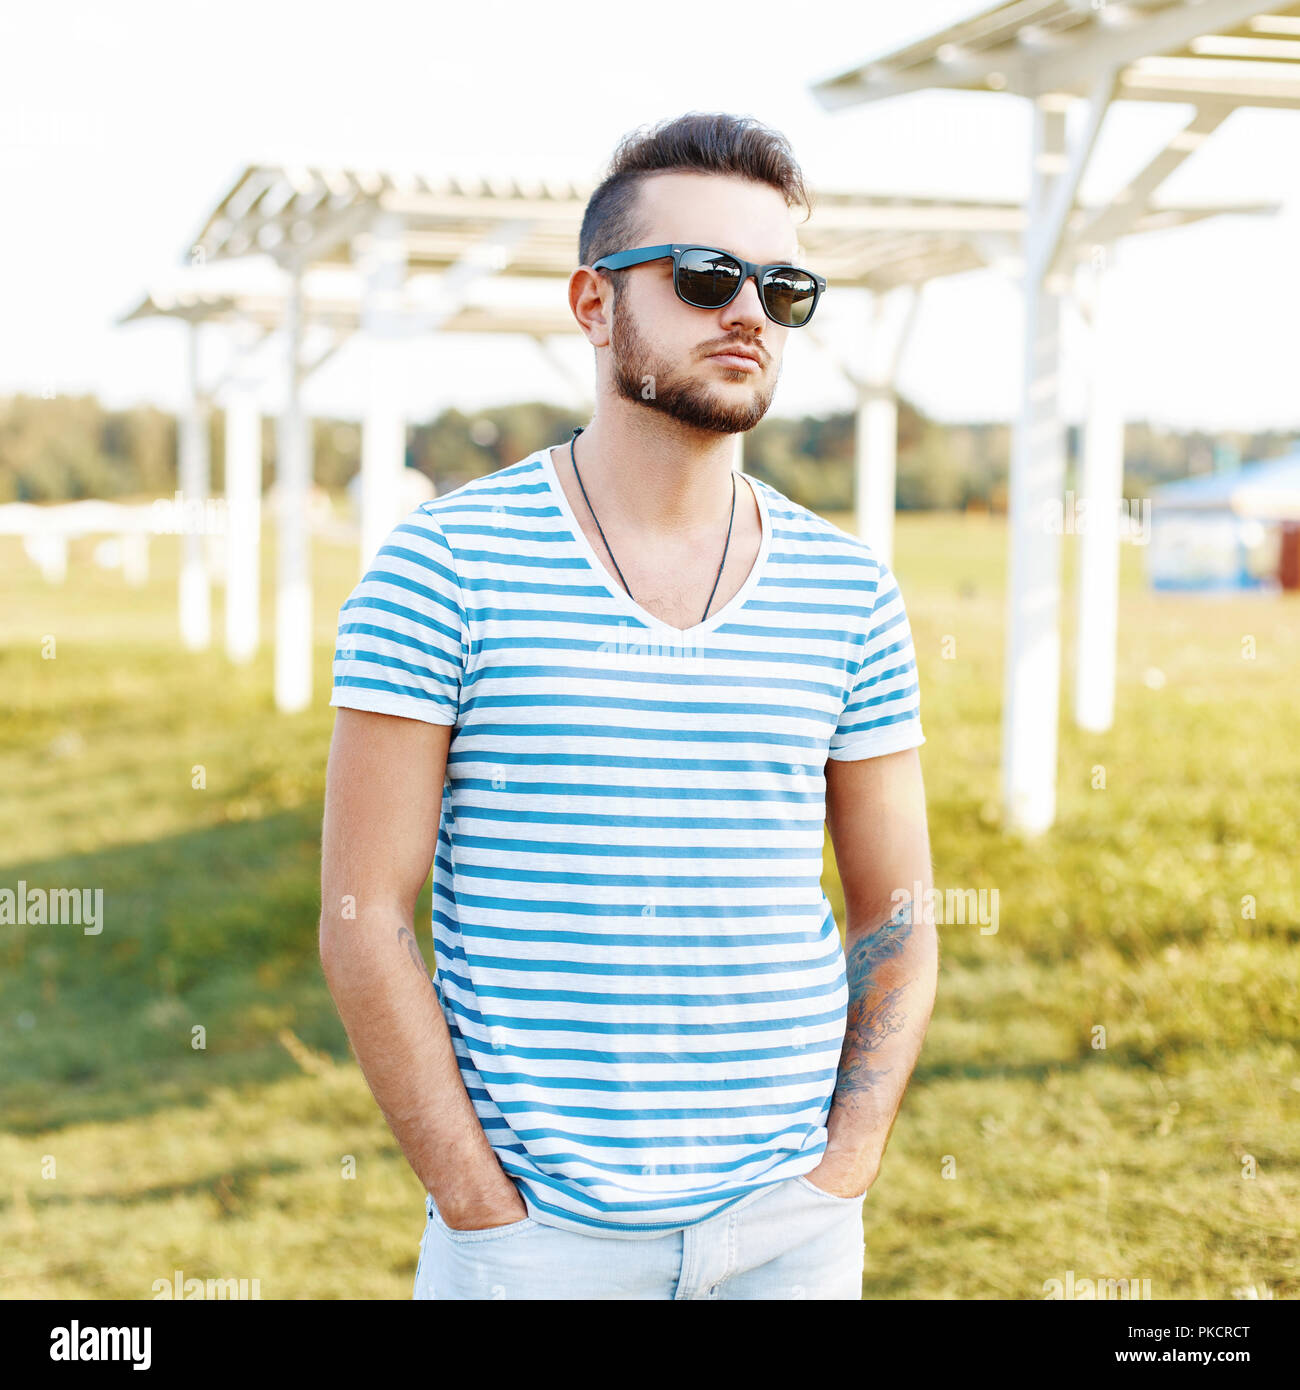 Handsome man in a stylish shirt and sunglasses resting on the beach. Stock Photo